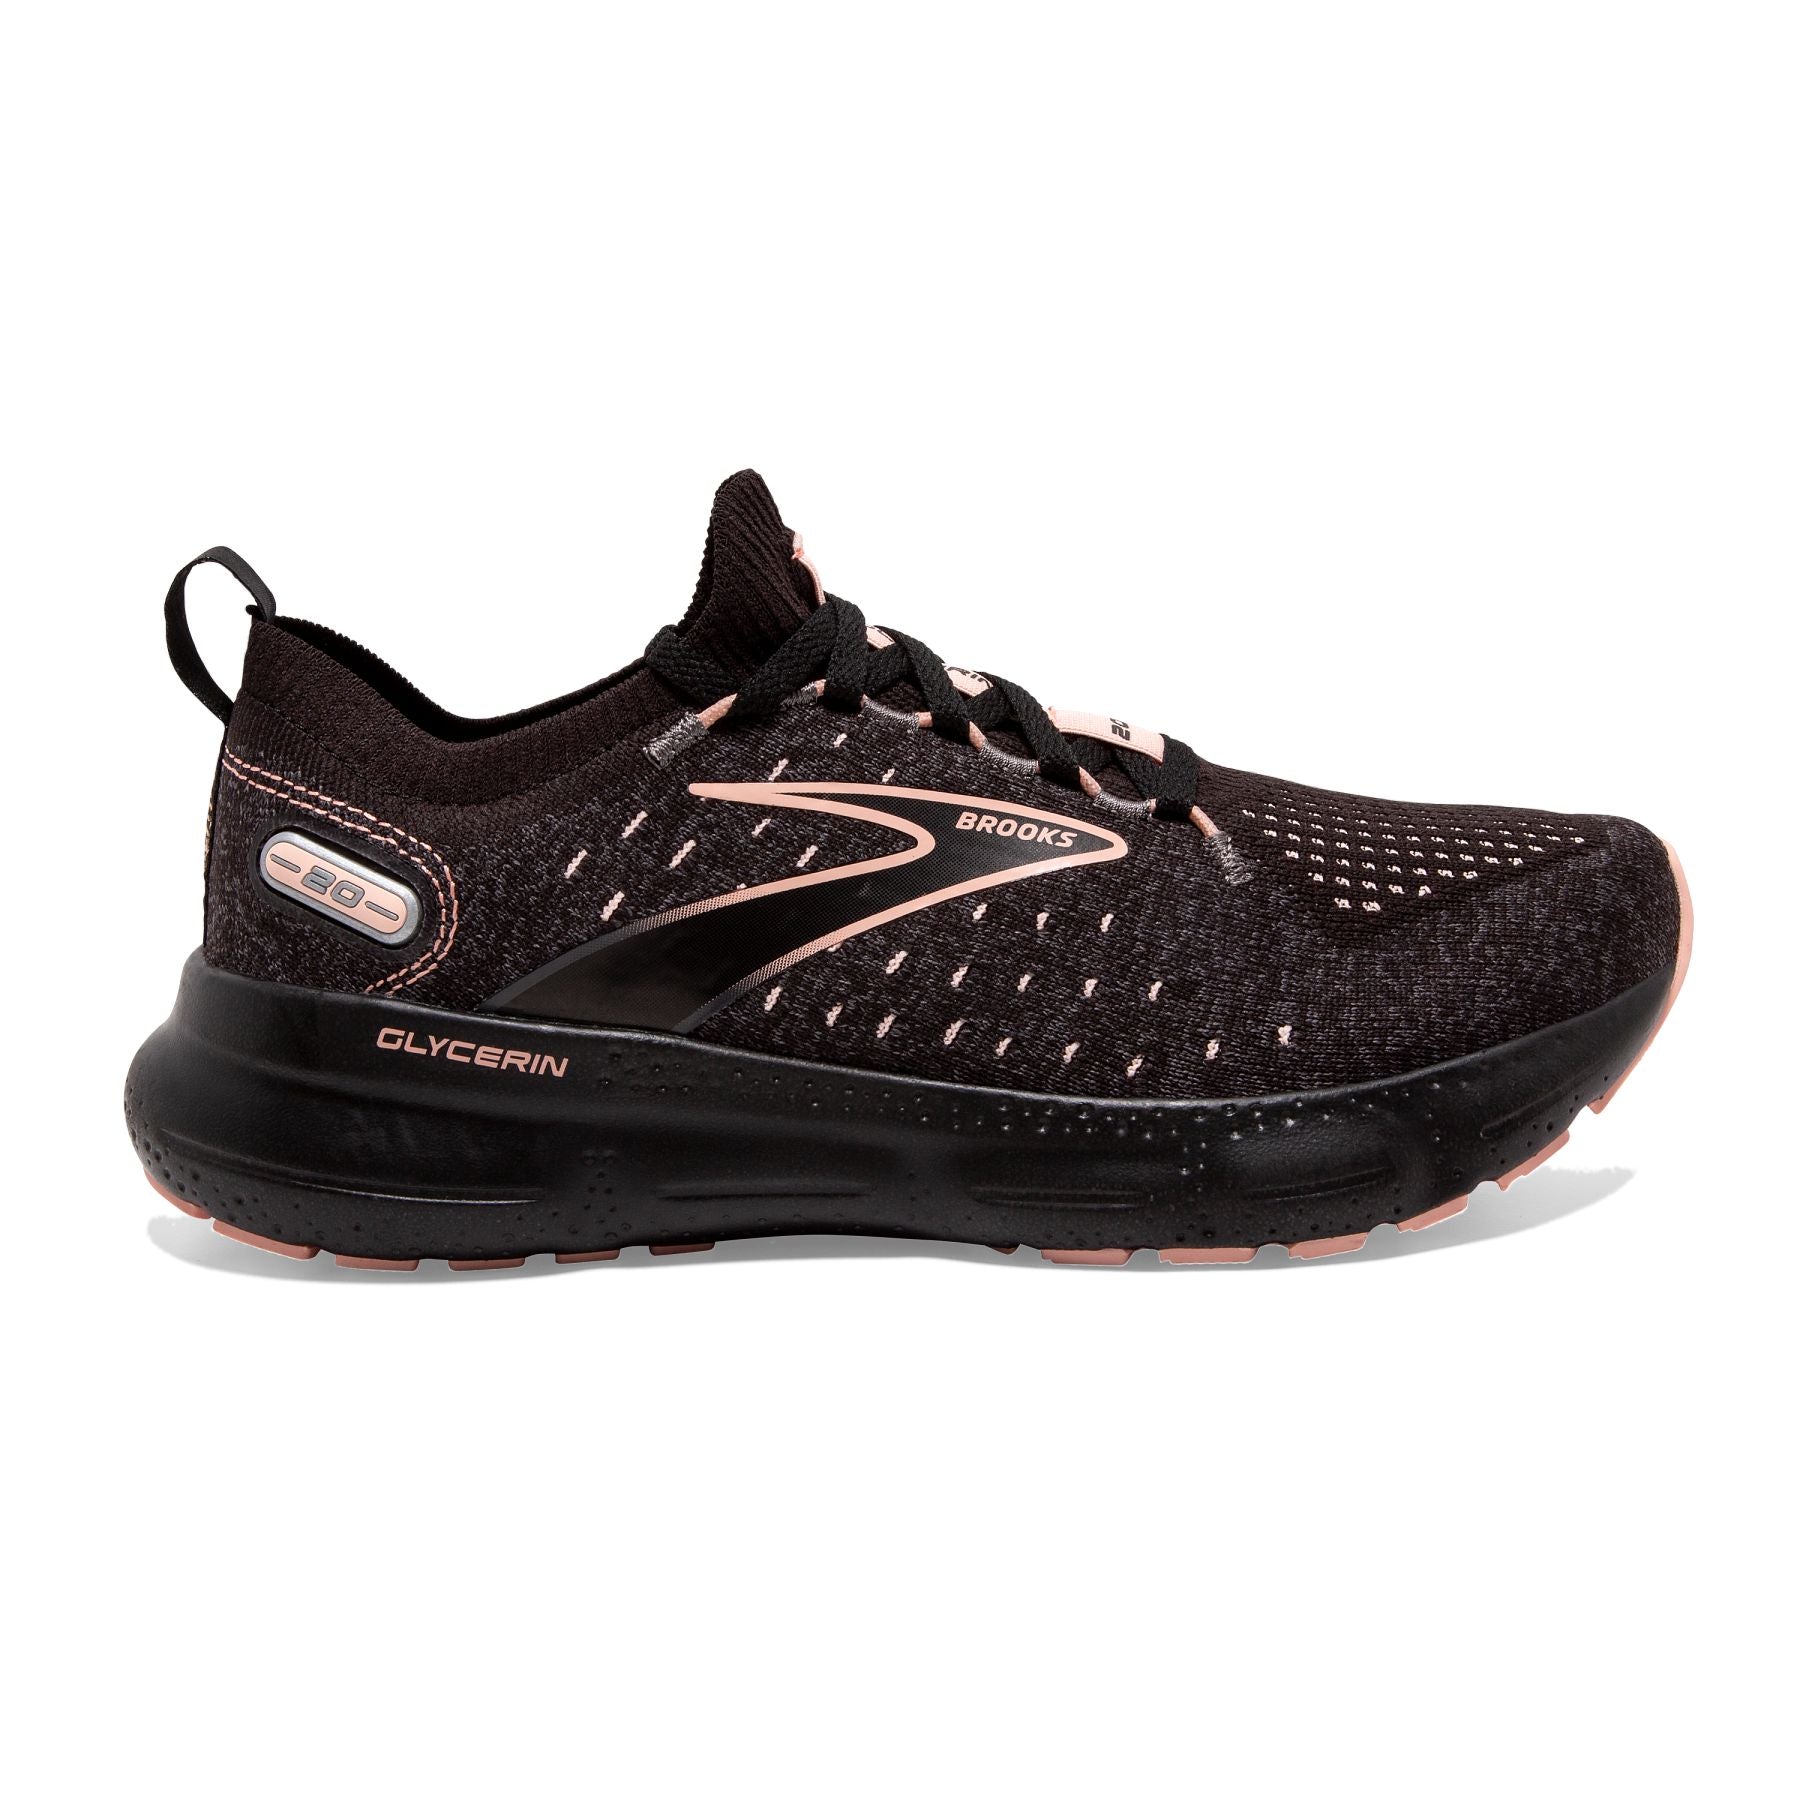 Lateral view of the Women's Glycerin Stealthfit 20 in the color Black/Pearl/Peach